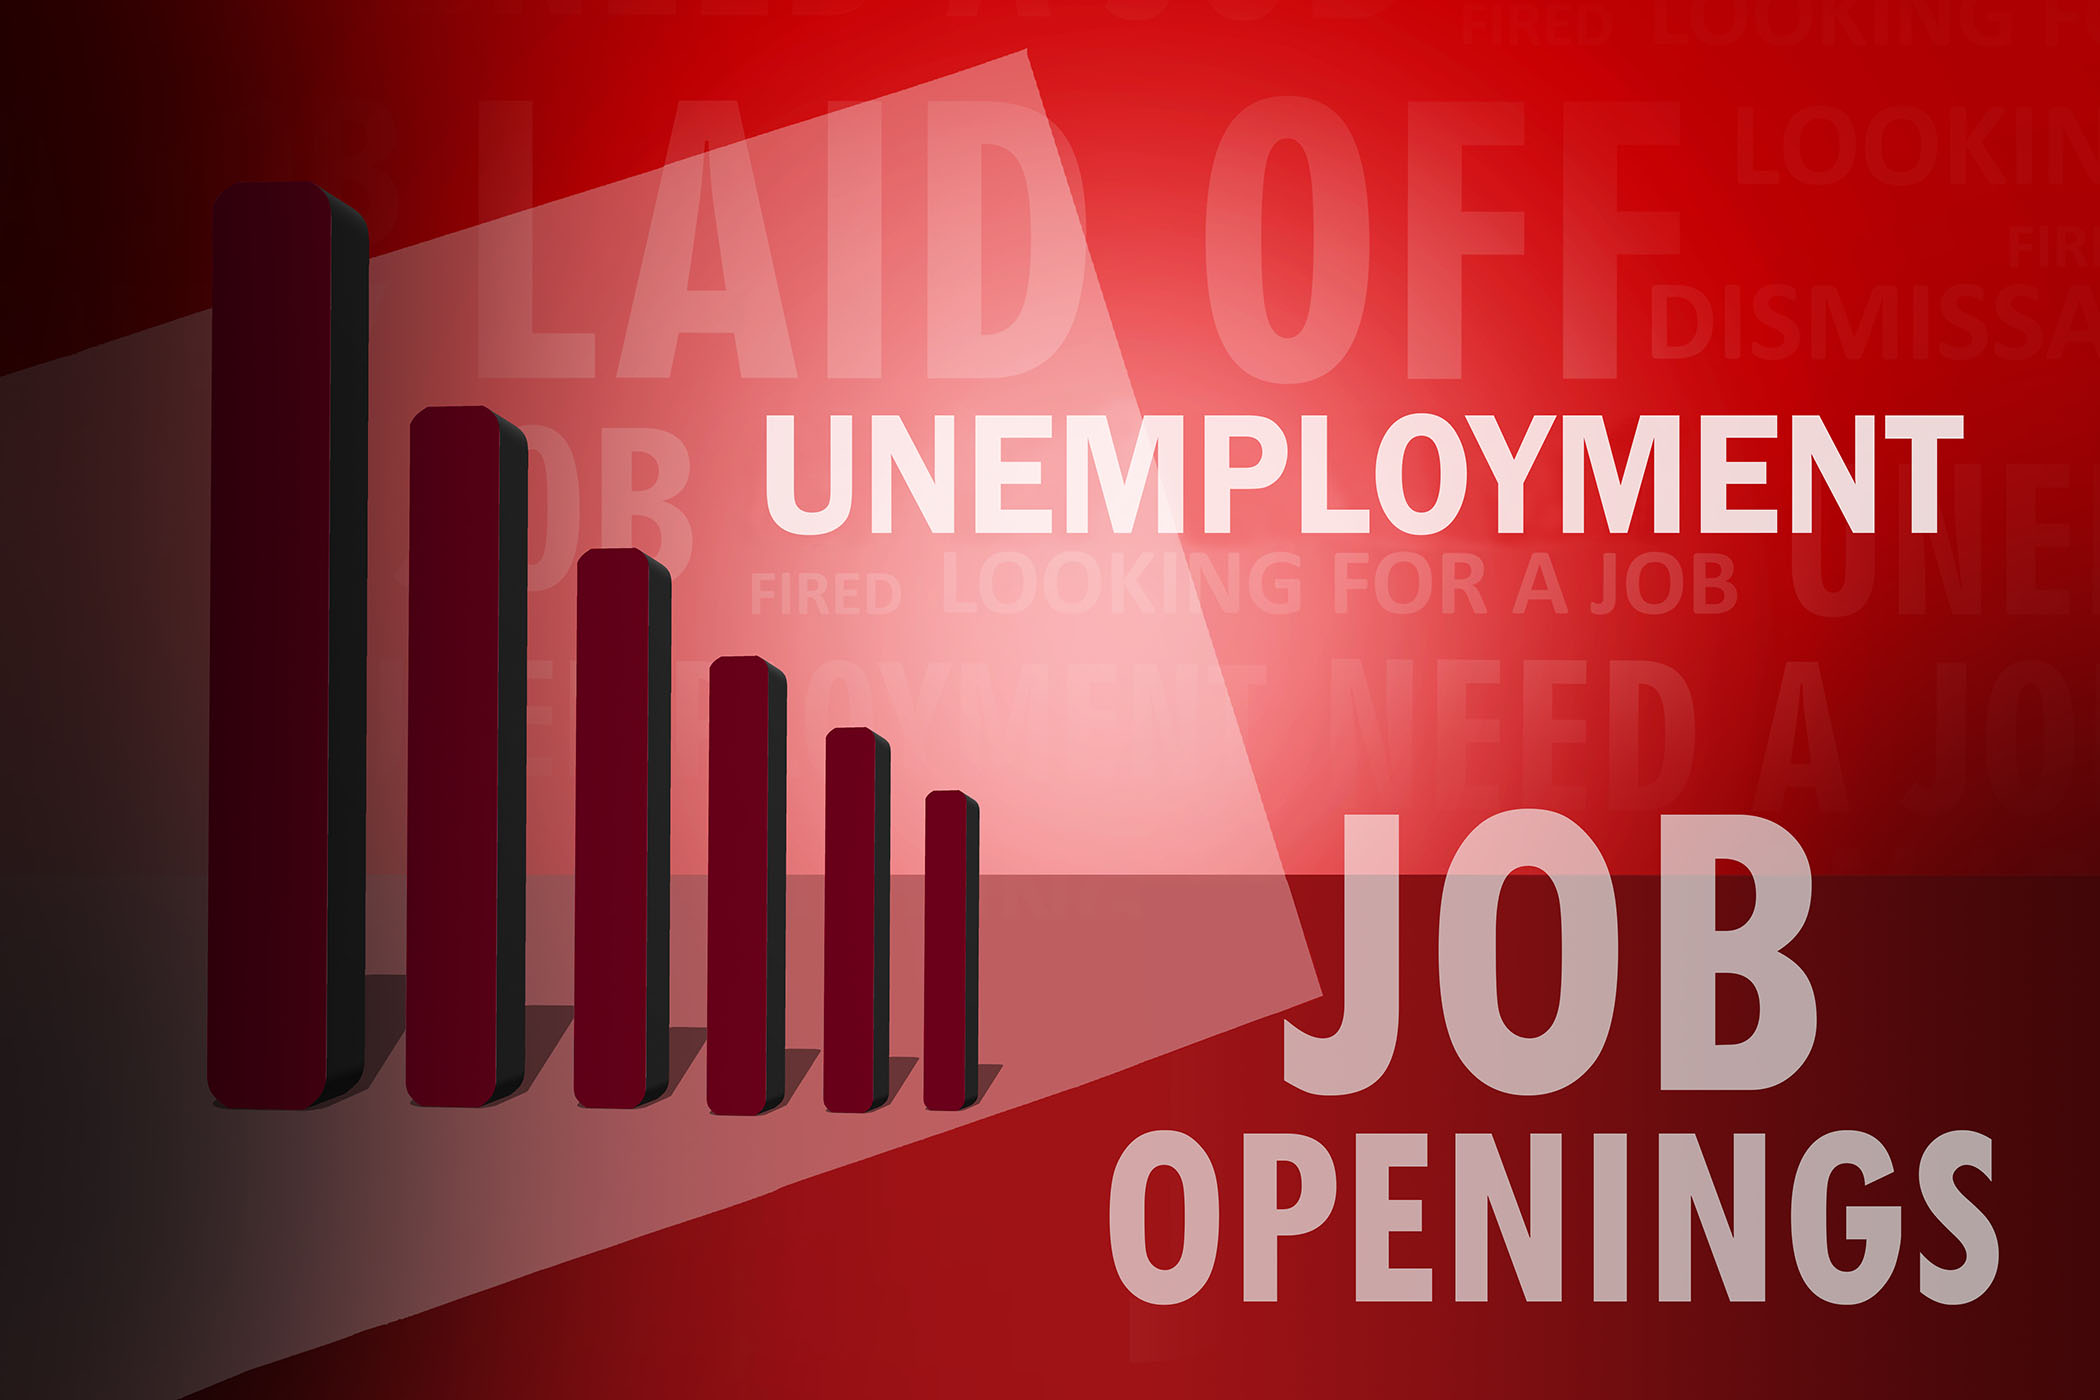 What is the unemployed people per job openings ratio? A 21-year case study into unemployment trends